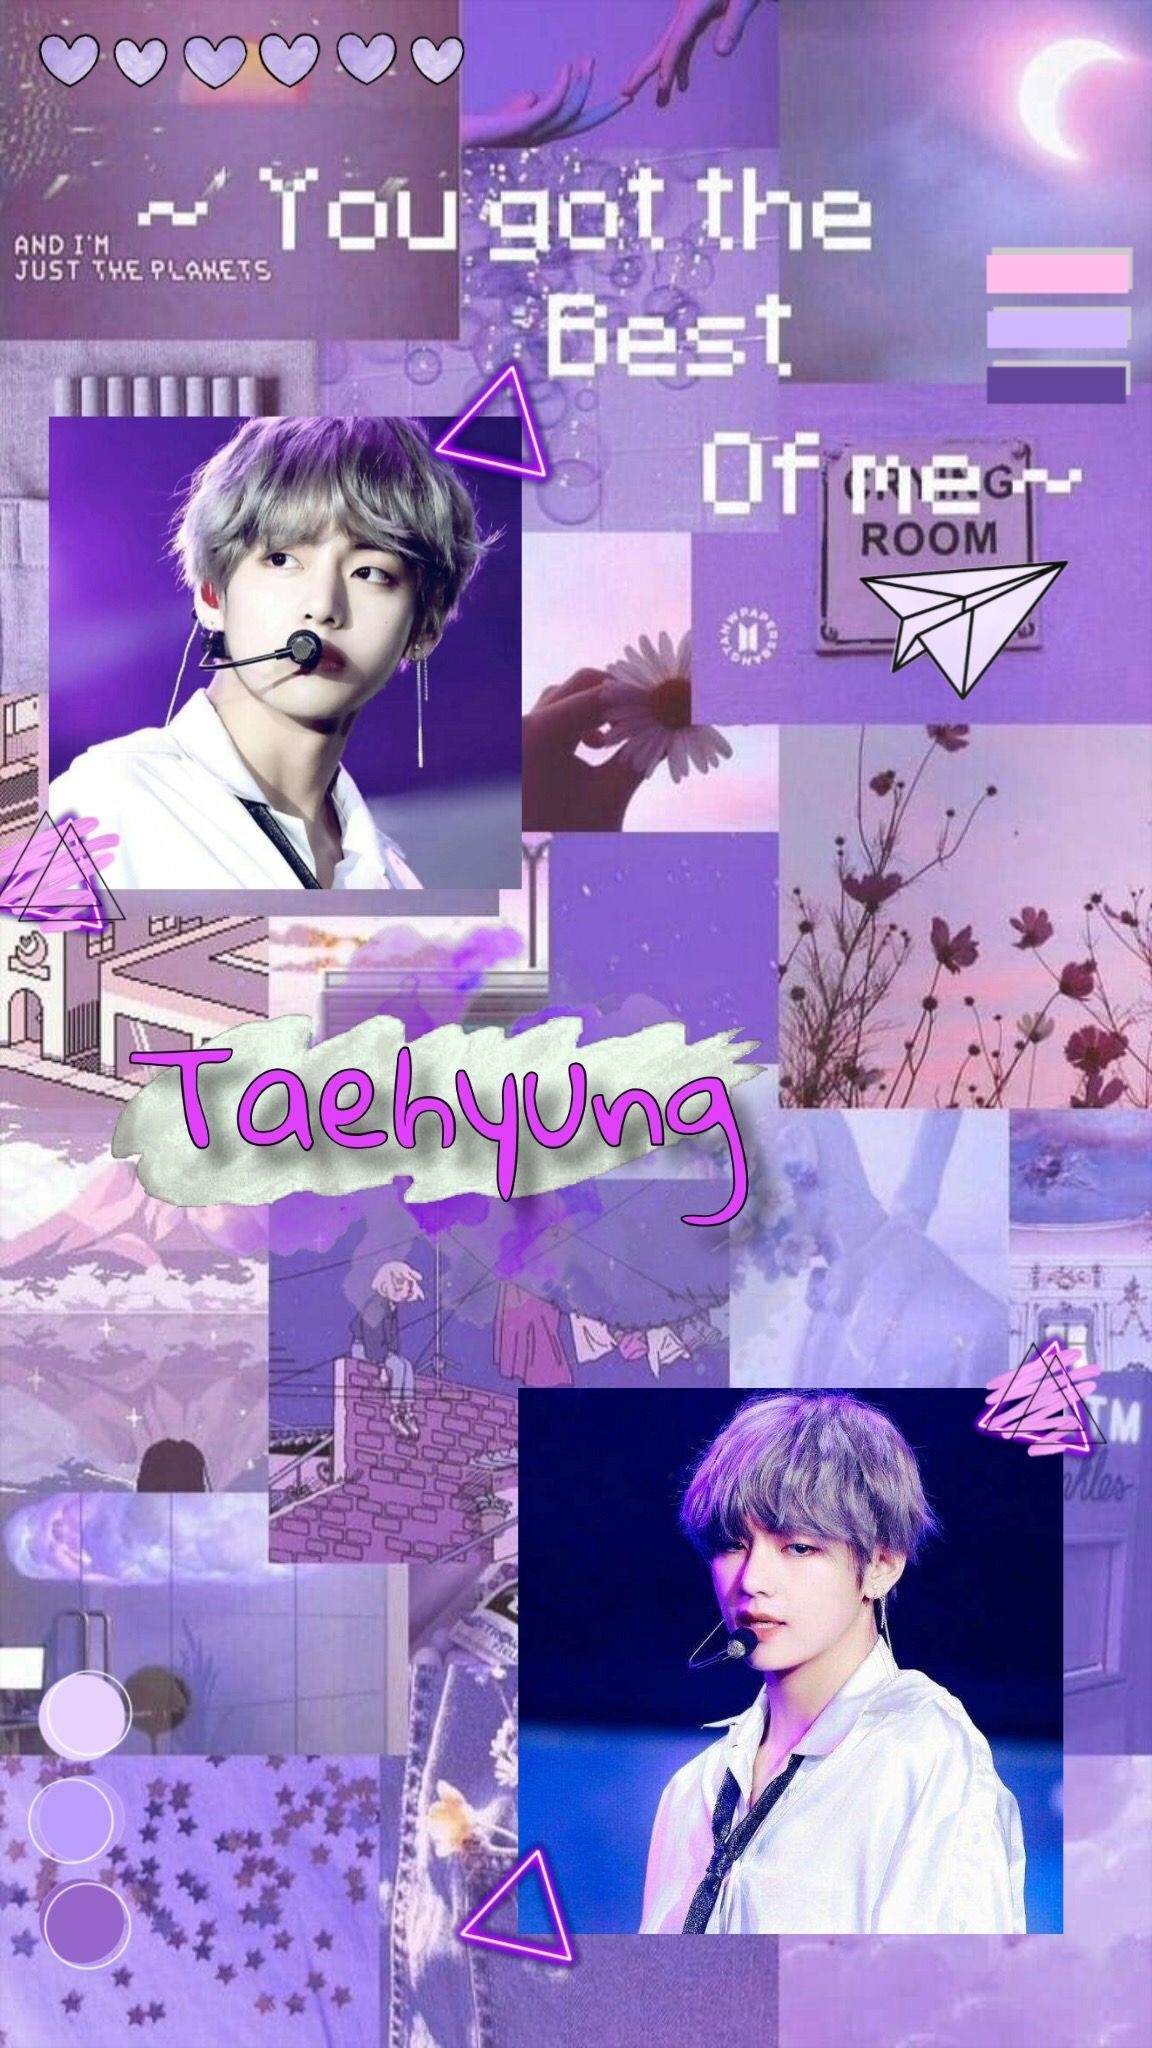 15 Best wallpaper aesthetic v bts You Can Save It free - Aesthetic Arena